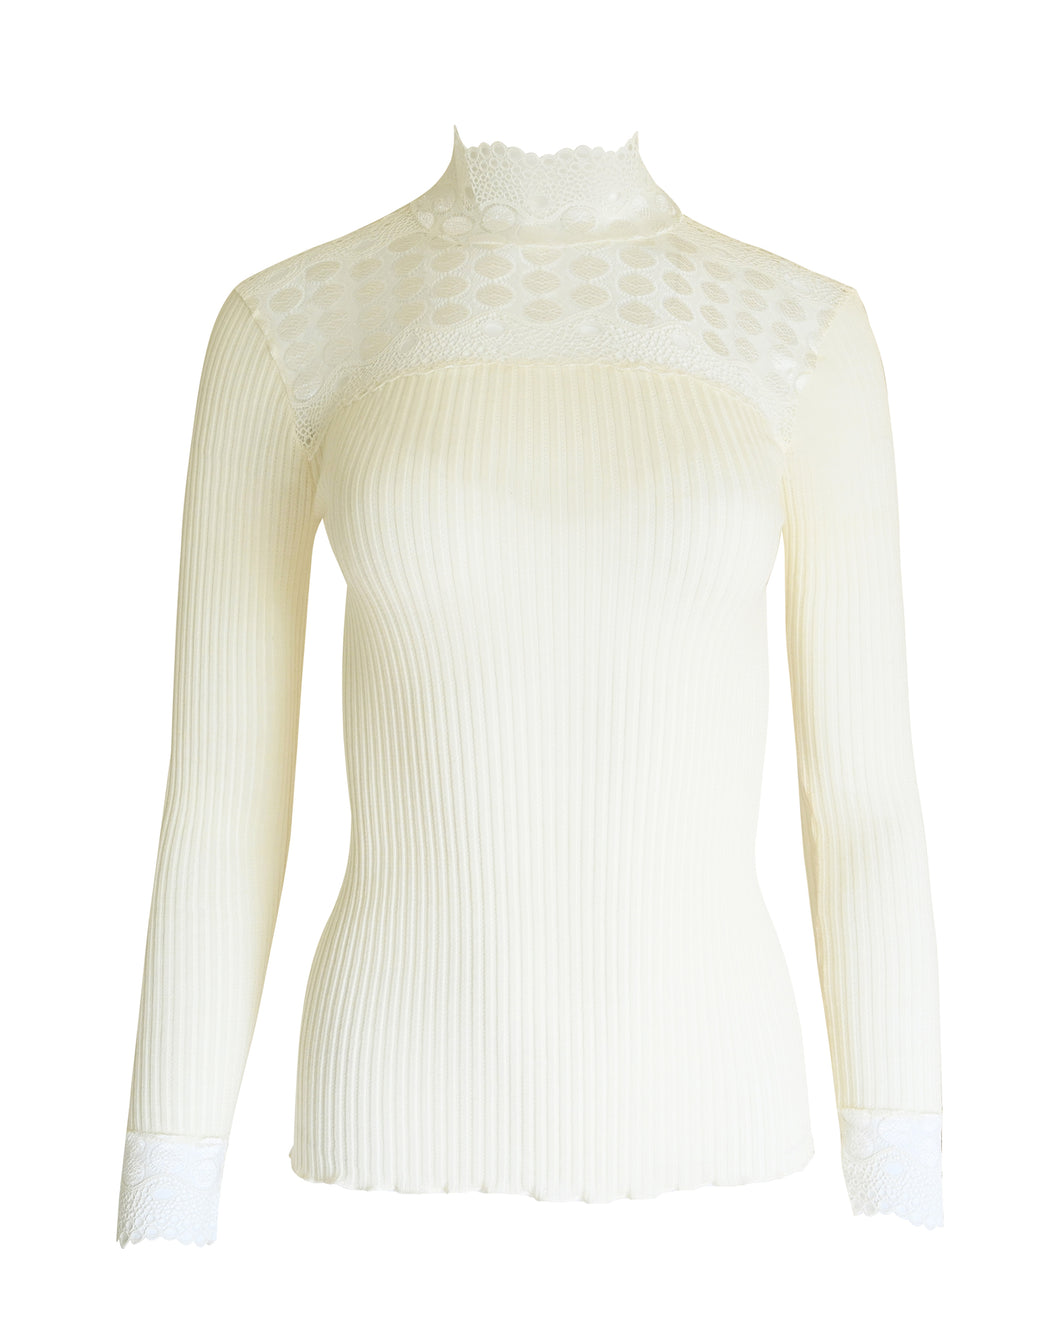 EGI Exclusive Merino Wool Blend Top Mock Neck Lace Trim Long Sleeves. Proudly Made in Italy.